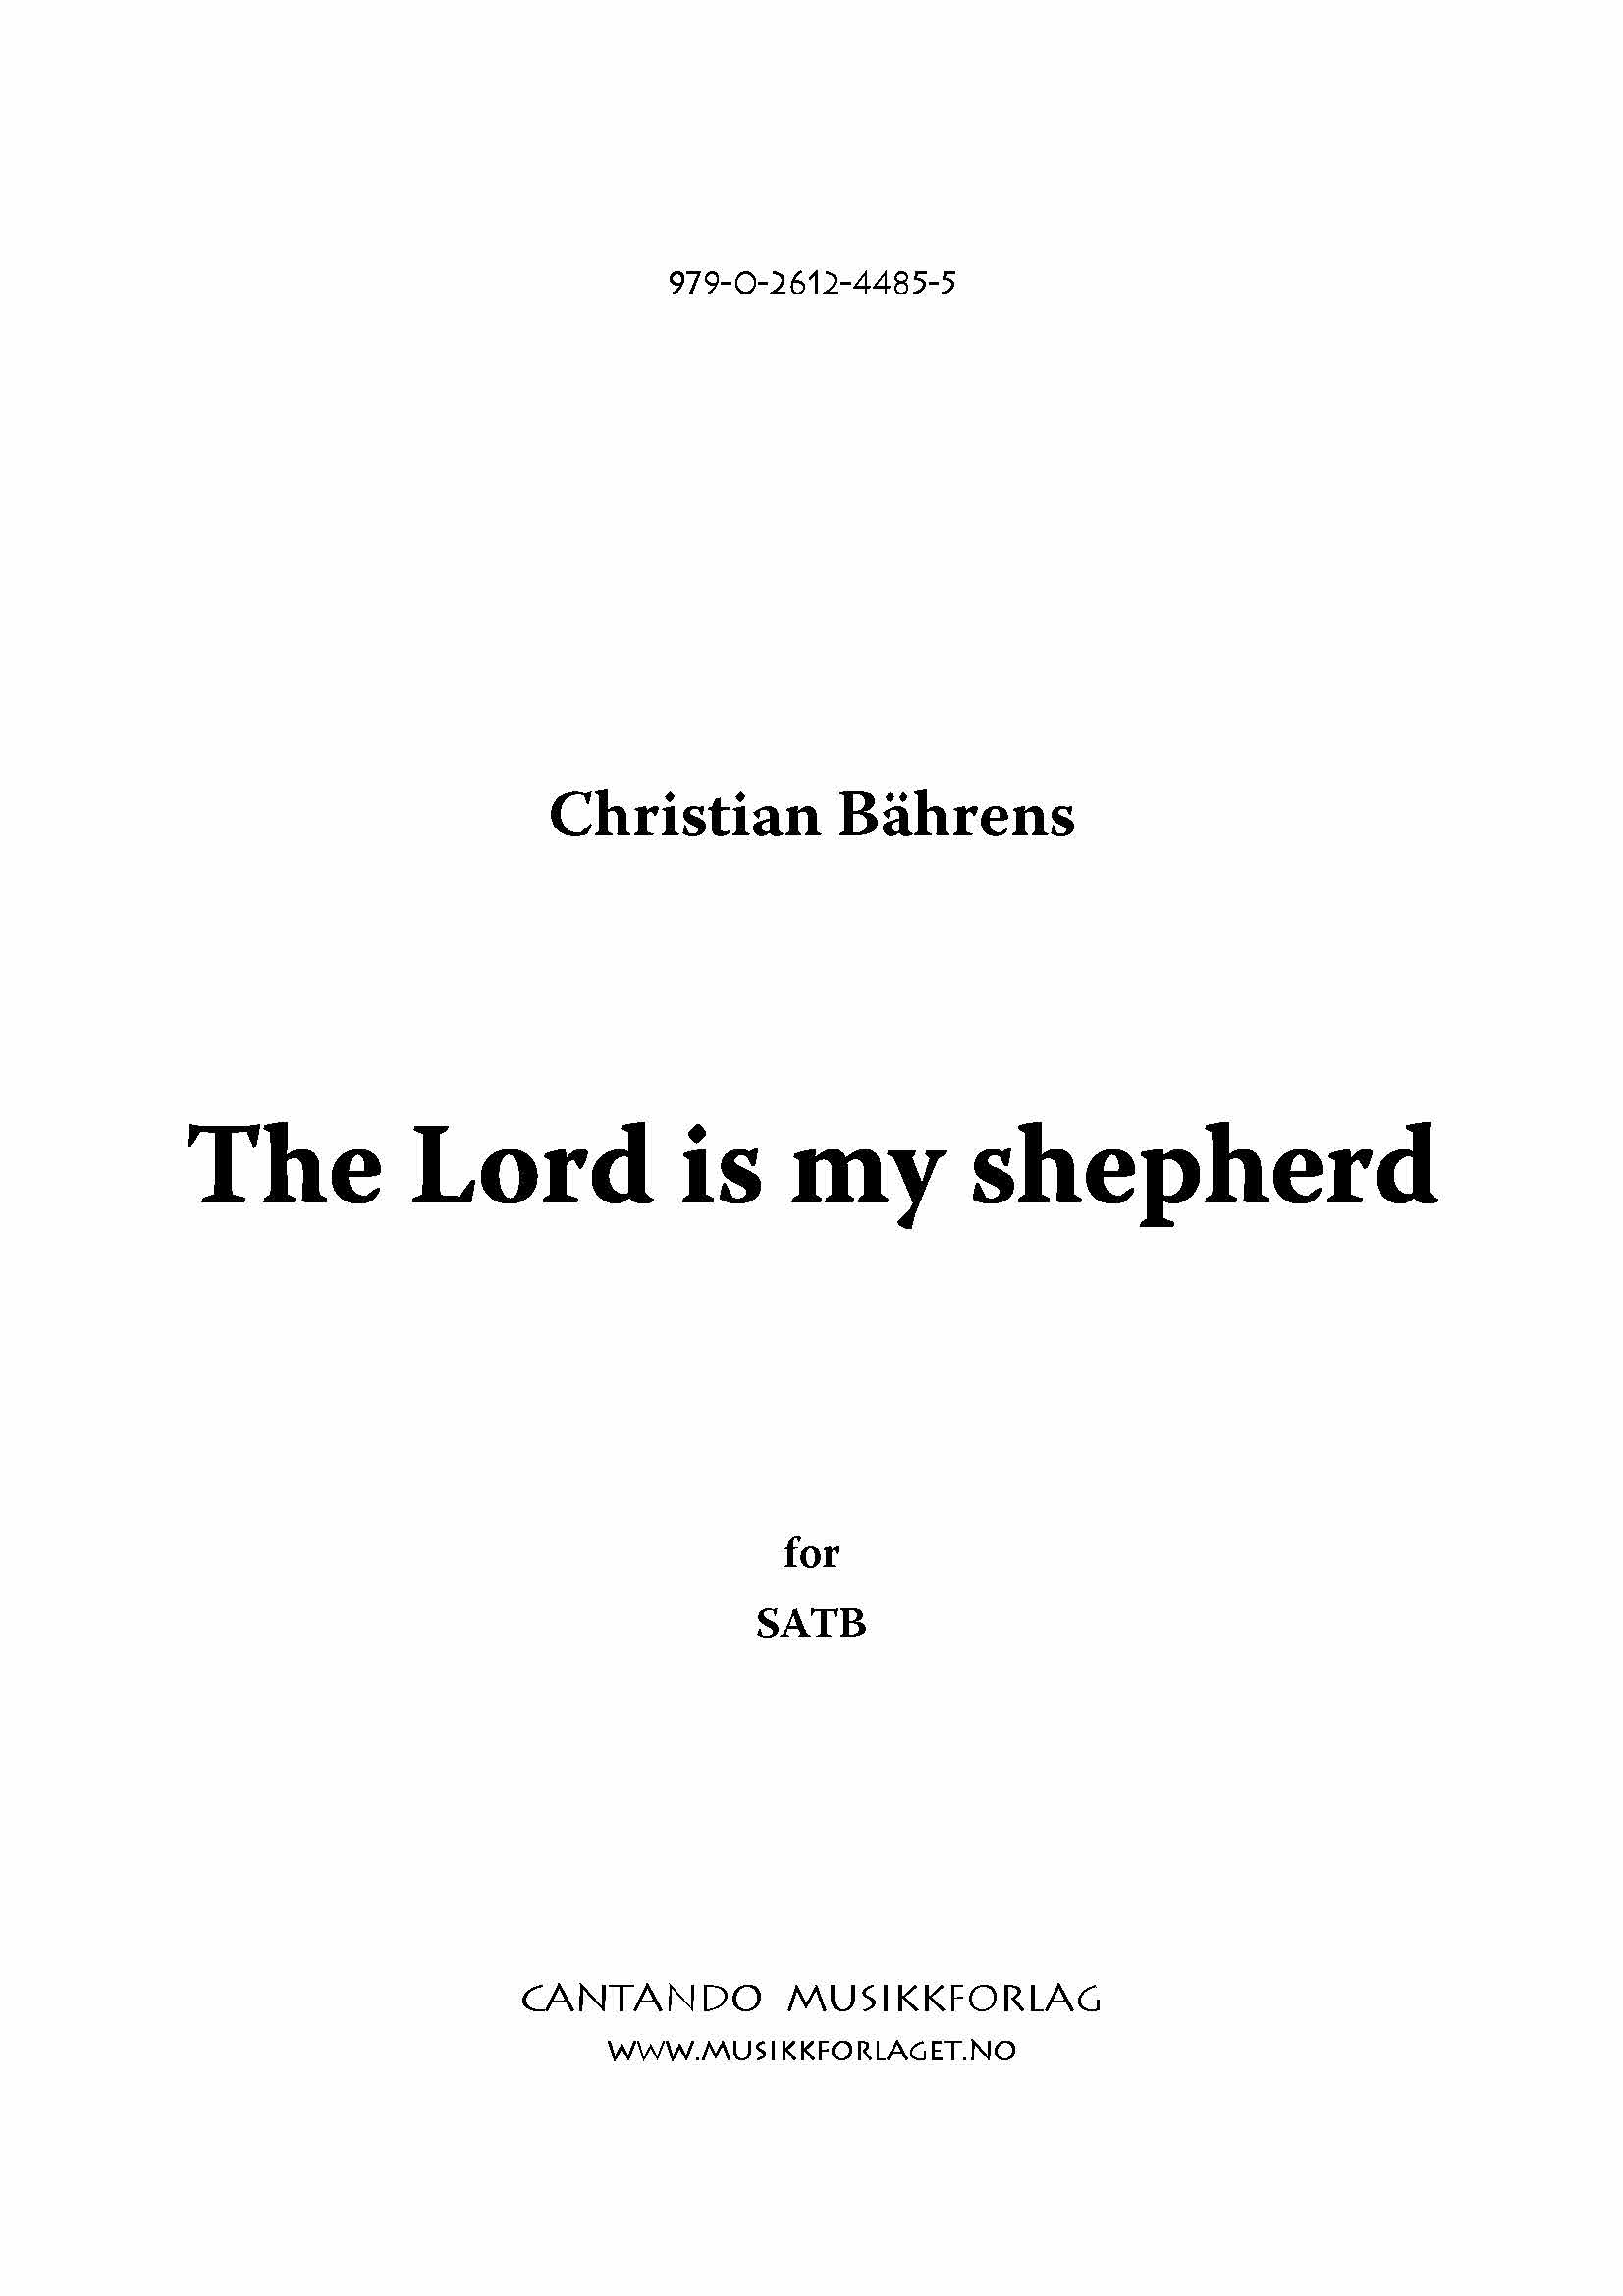 The Lord is my sheperd - SATB